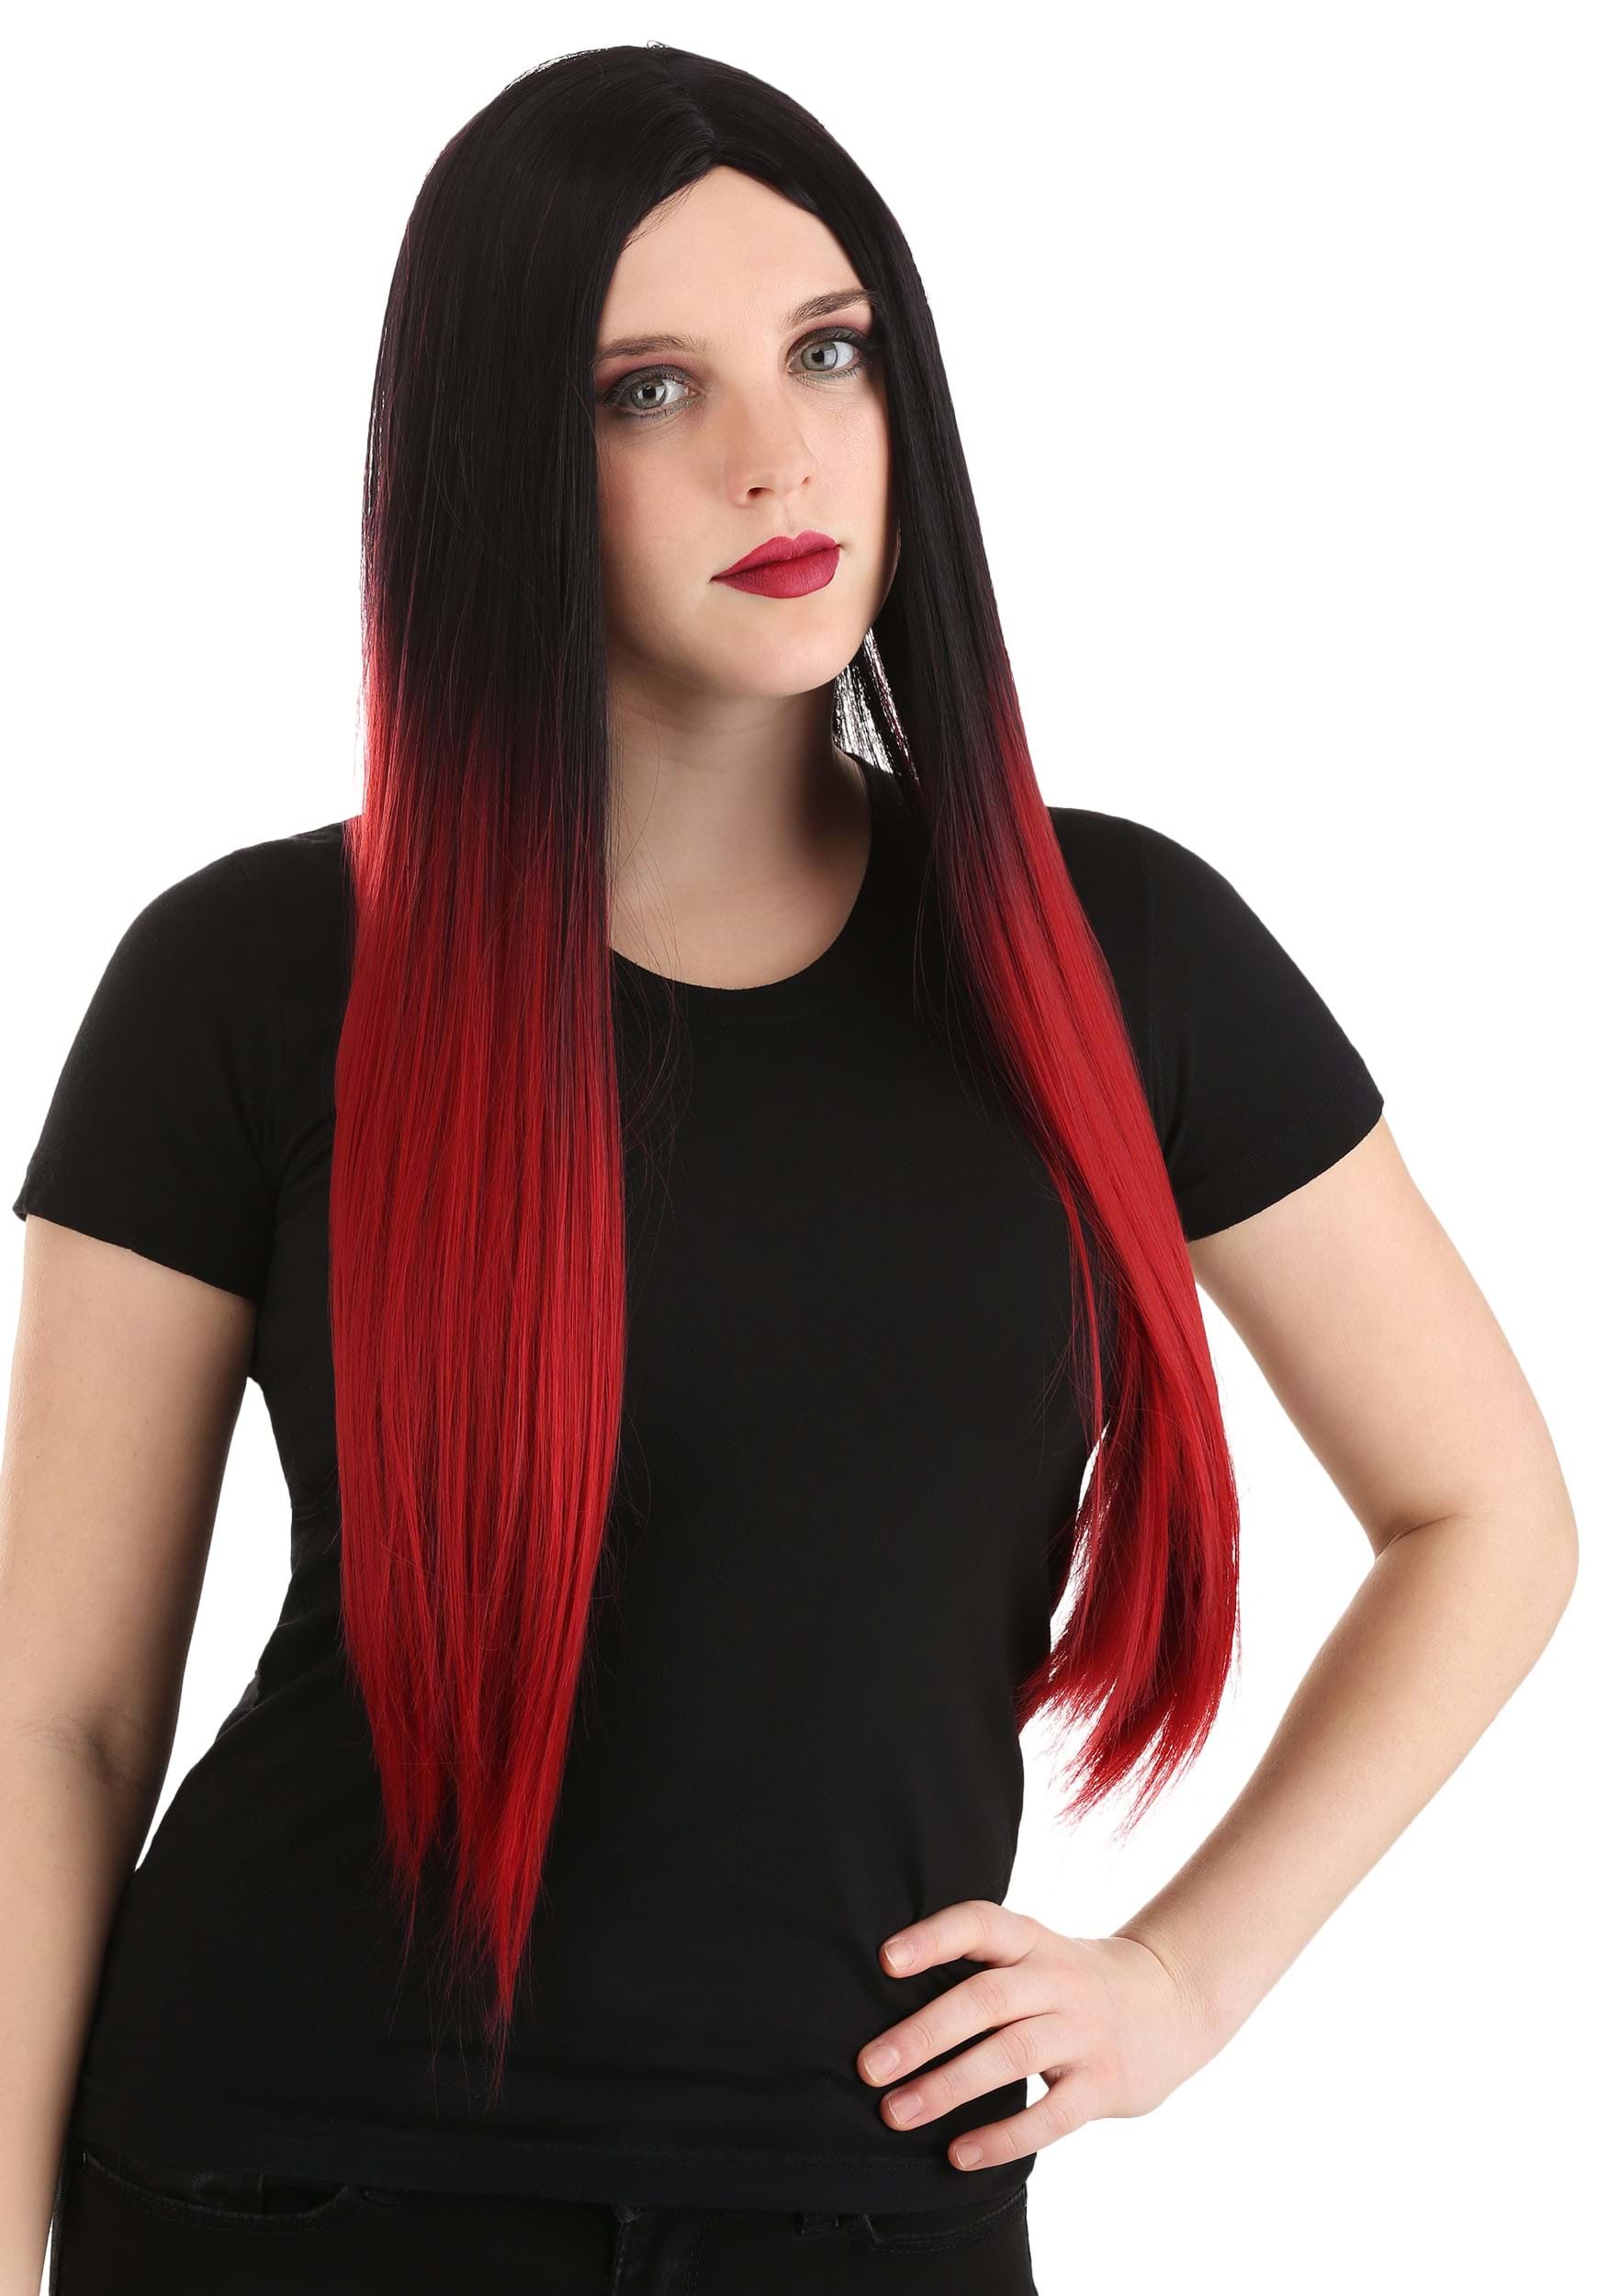 Photos - Fancy Dress A&D FUN Costumes Black & Red Ombre Wig | Long Wigs Black/Red FUN1776 